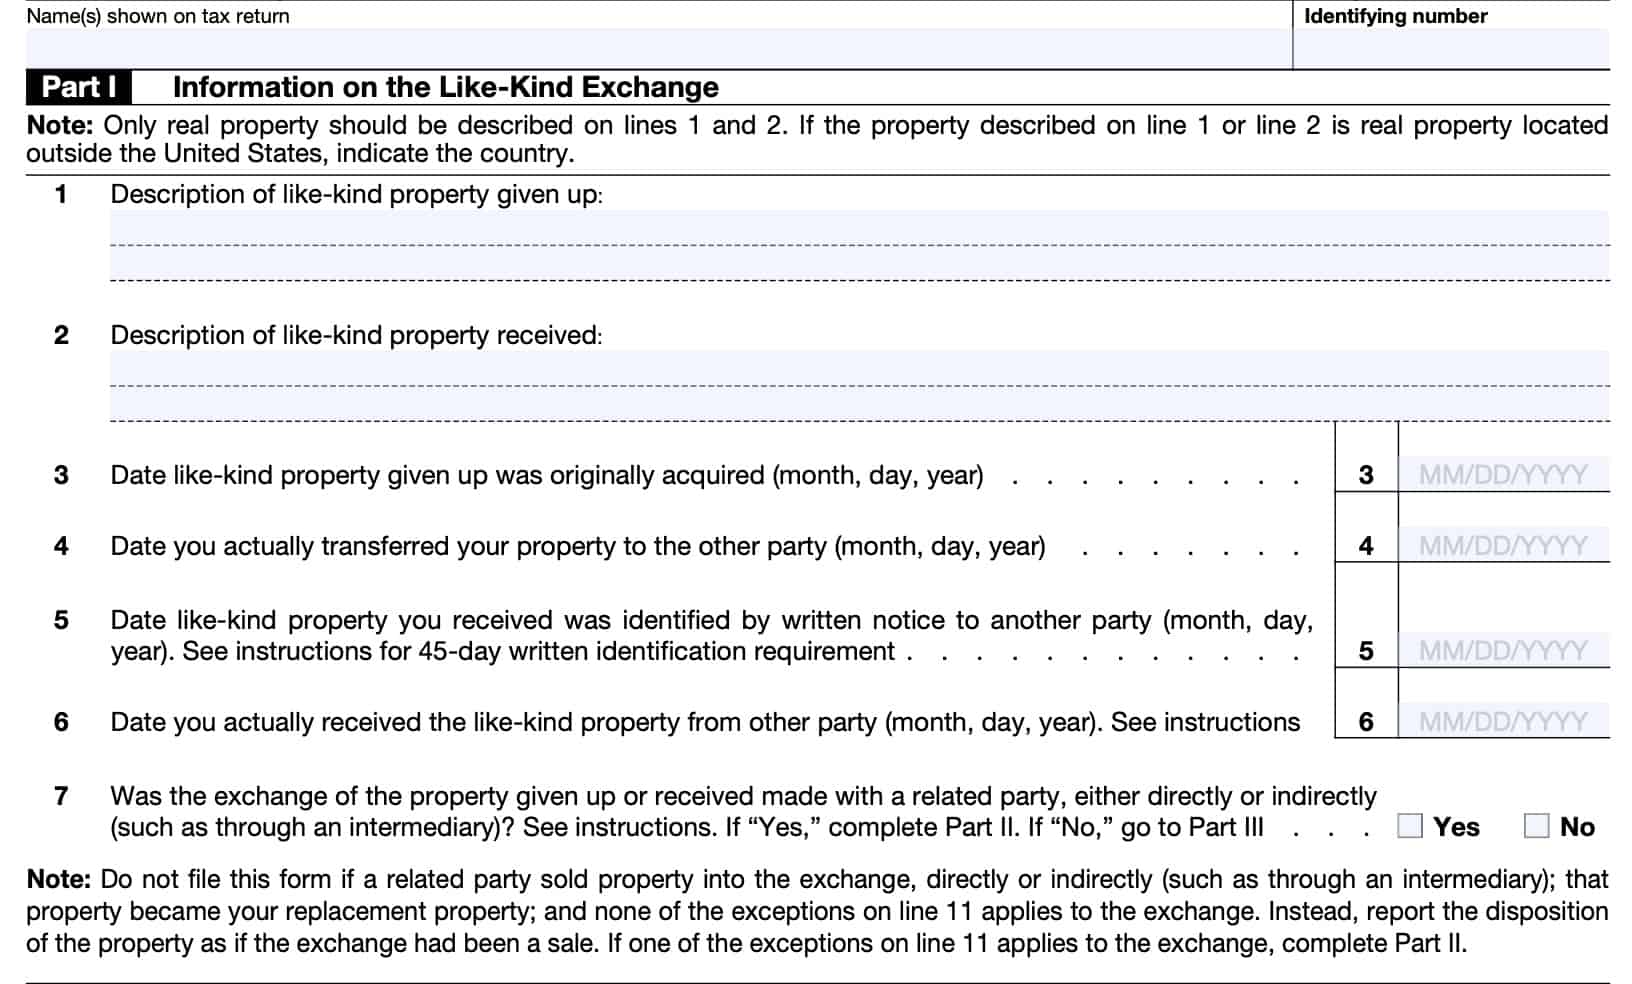 irs form 8824, part i: information on the like-kind exchange